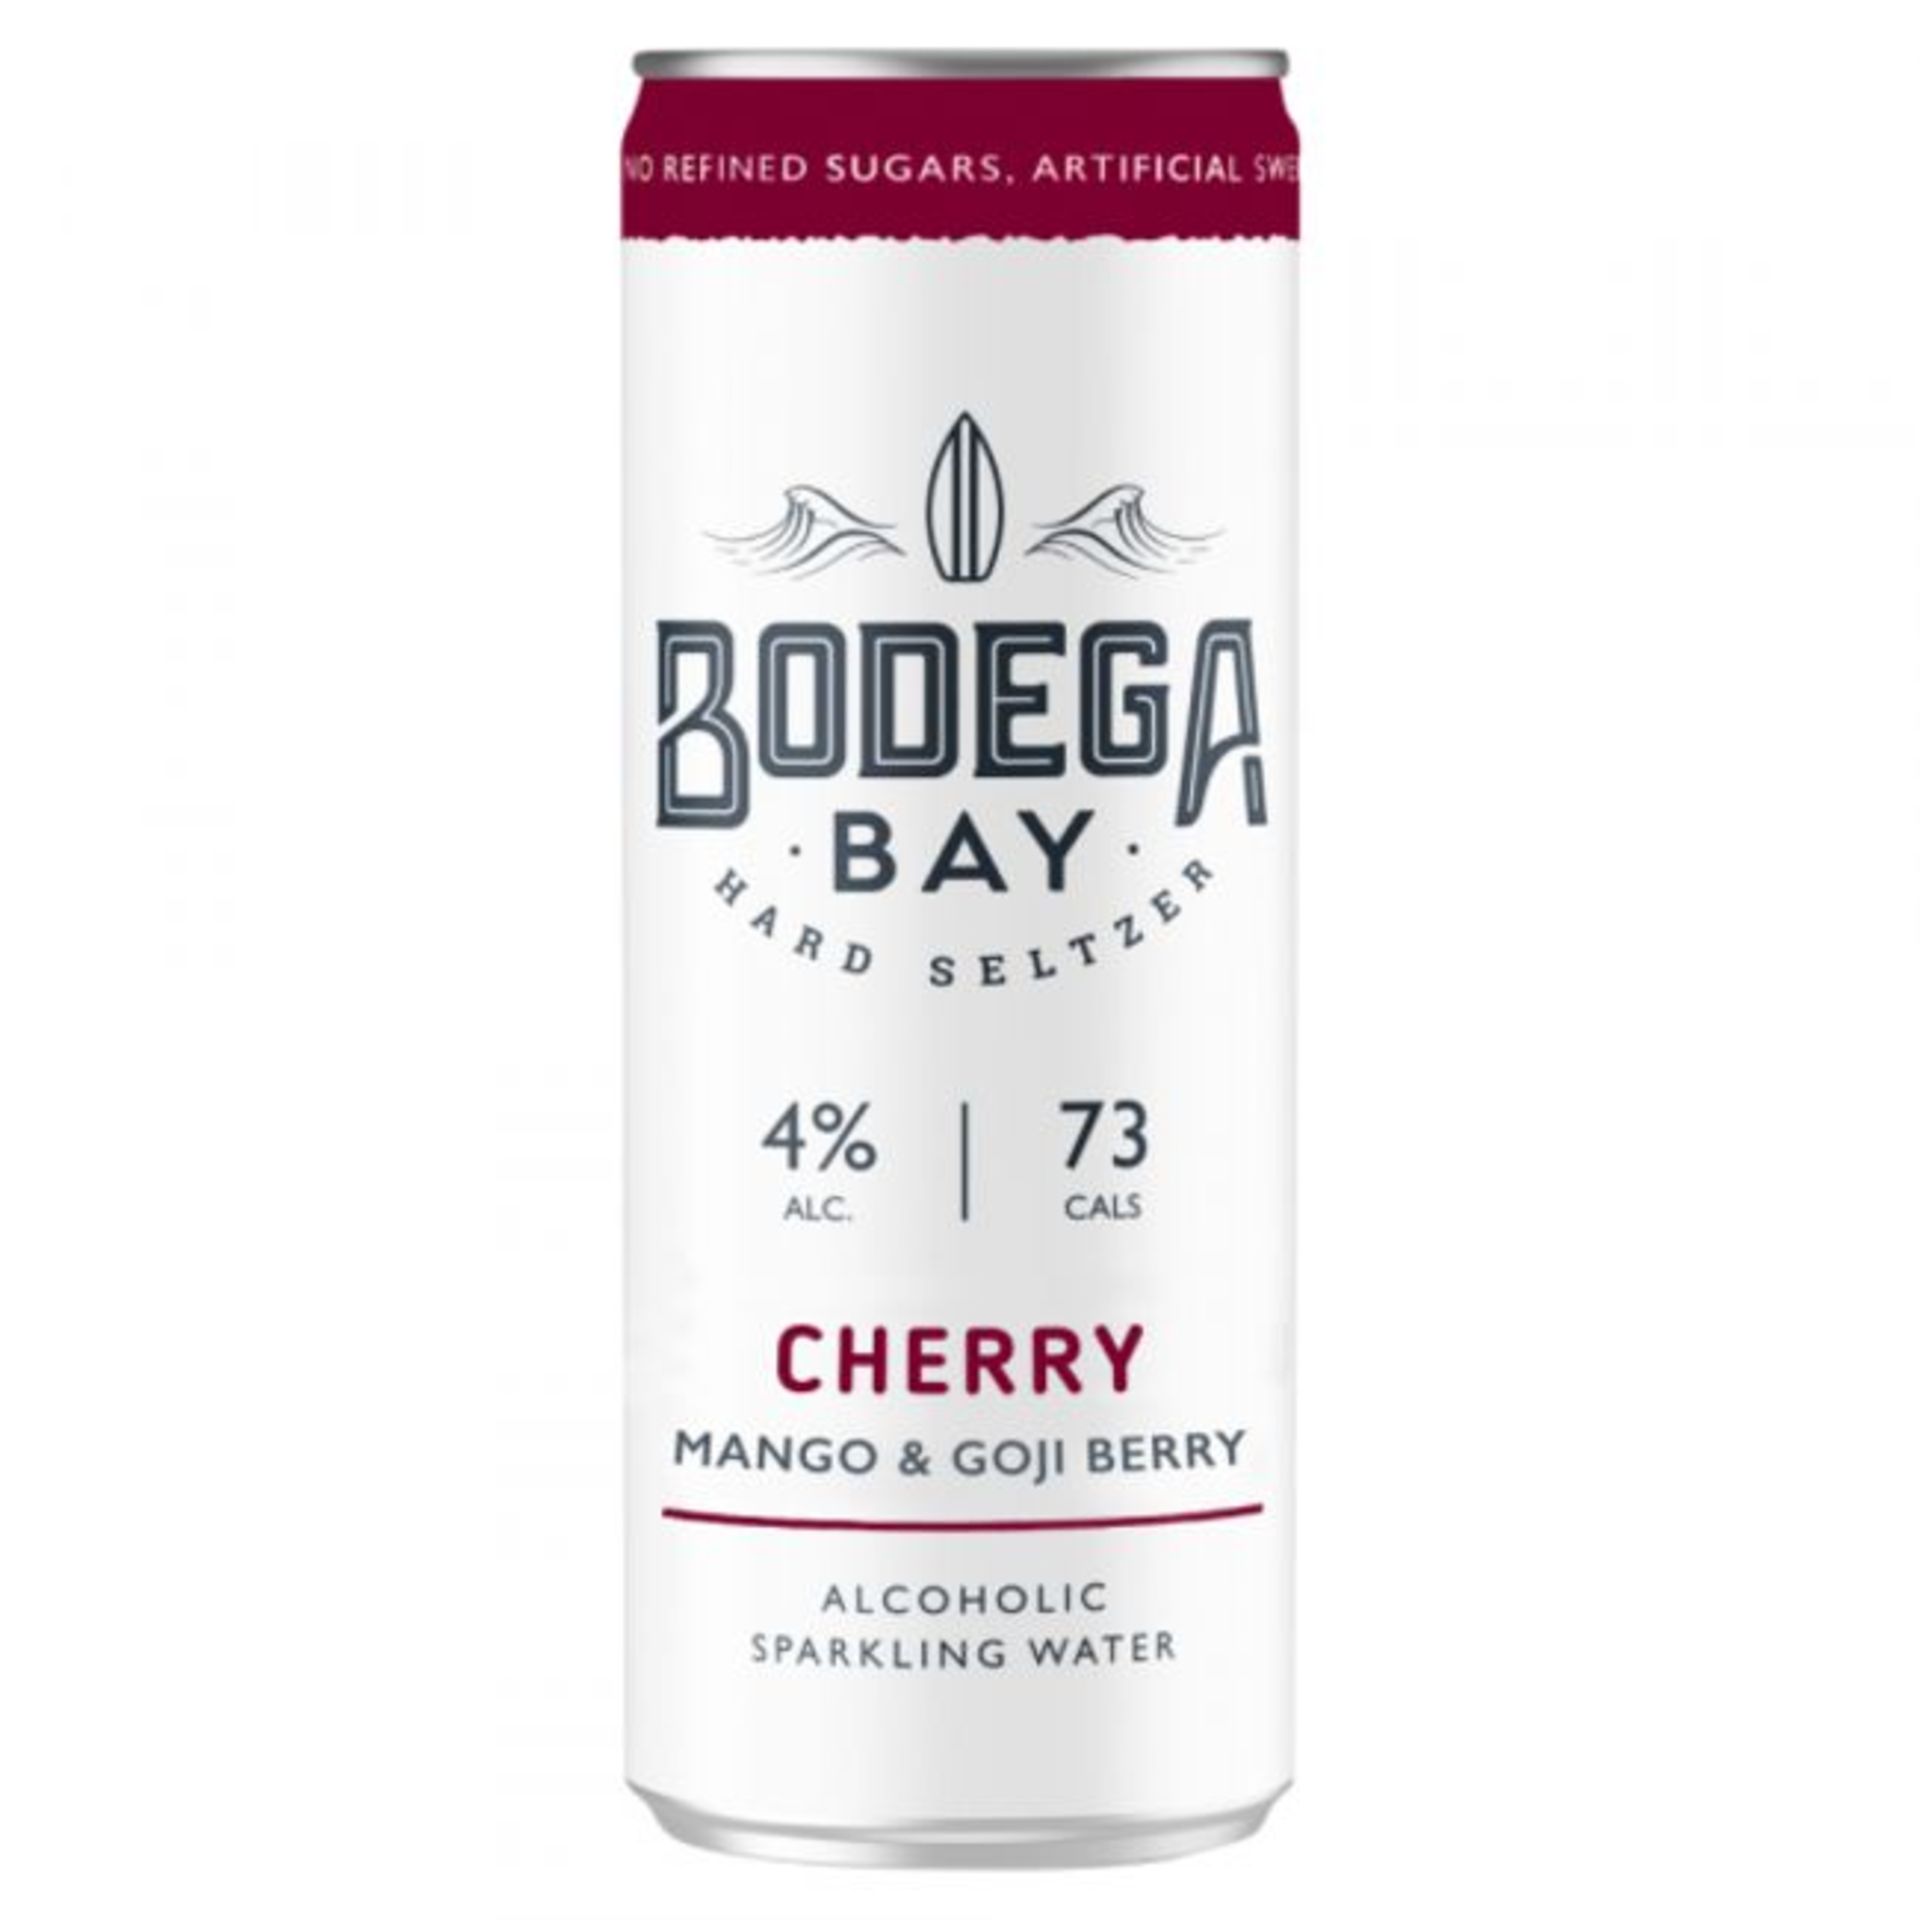 1,080 x Cans of Bodega Bay Hard Seltzer 250ml Alcoholic Sparkling Water Drinks - RESALE JOB LOT - - Image 5 of 21